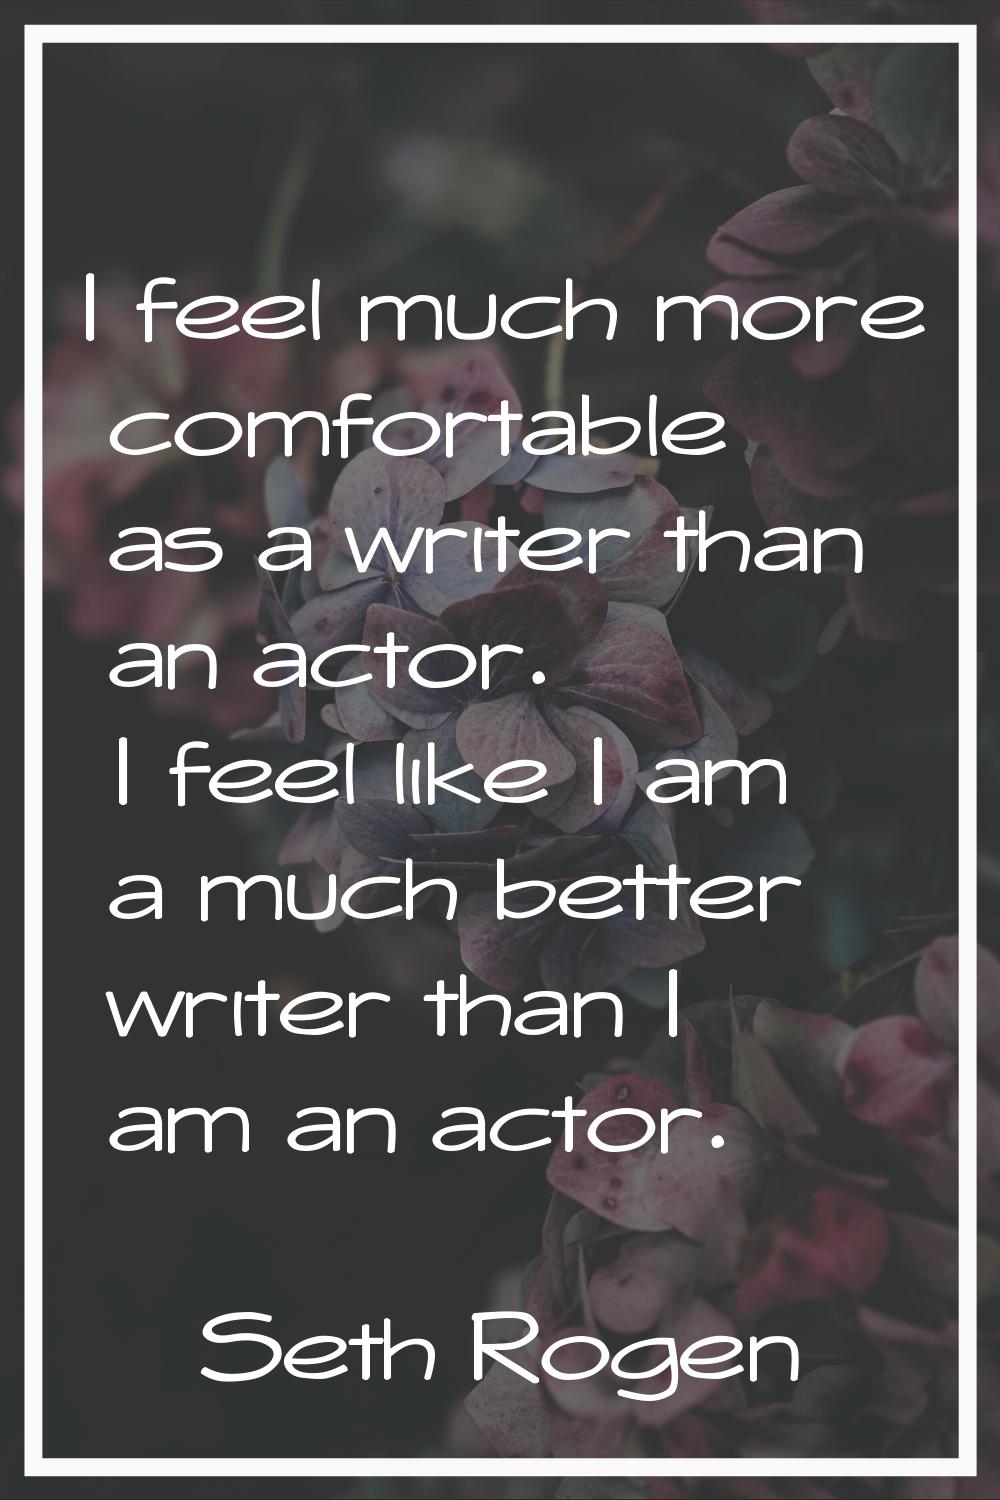 I feel much more comfortable as a writer than an actor. I feel like I am a much better writer than 